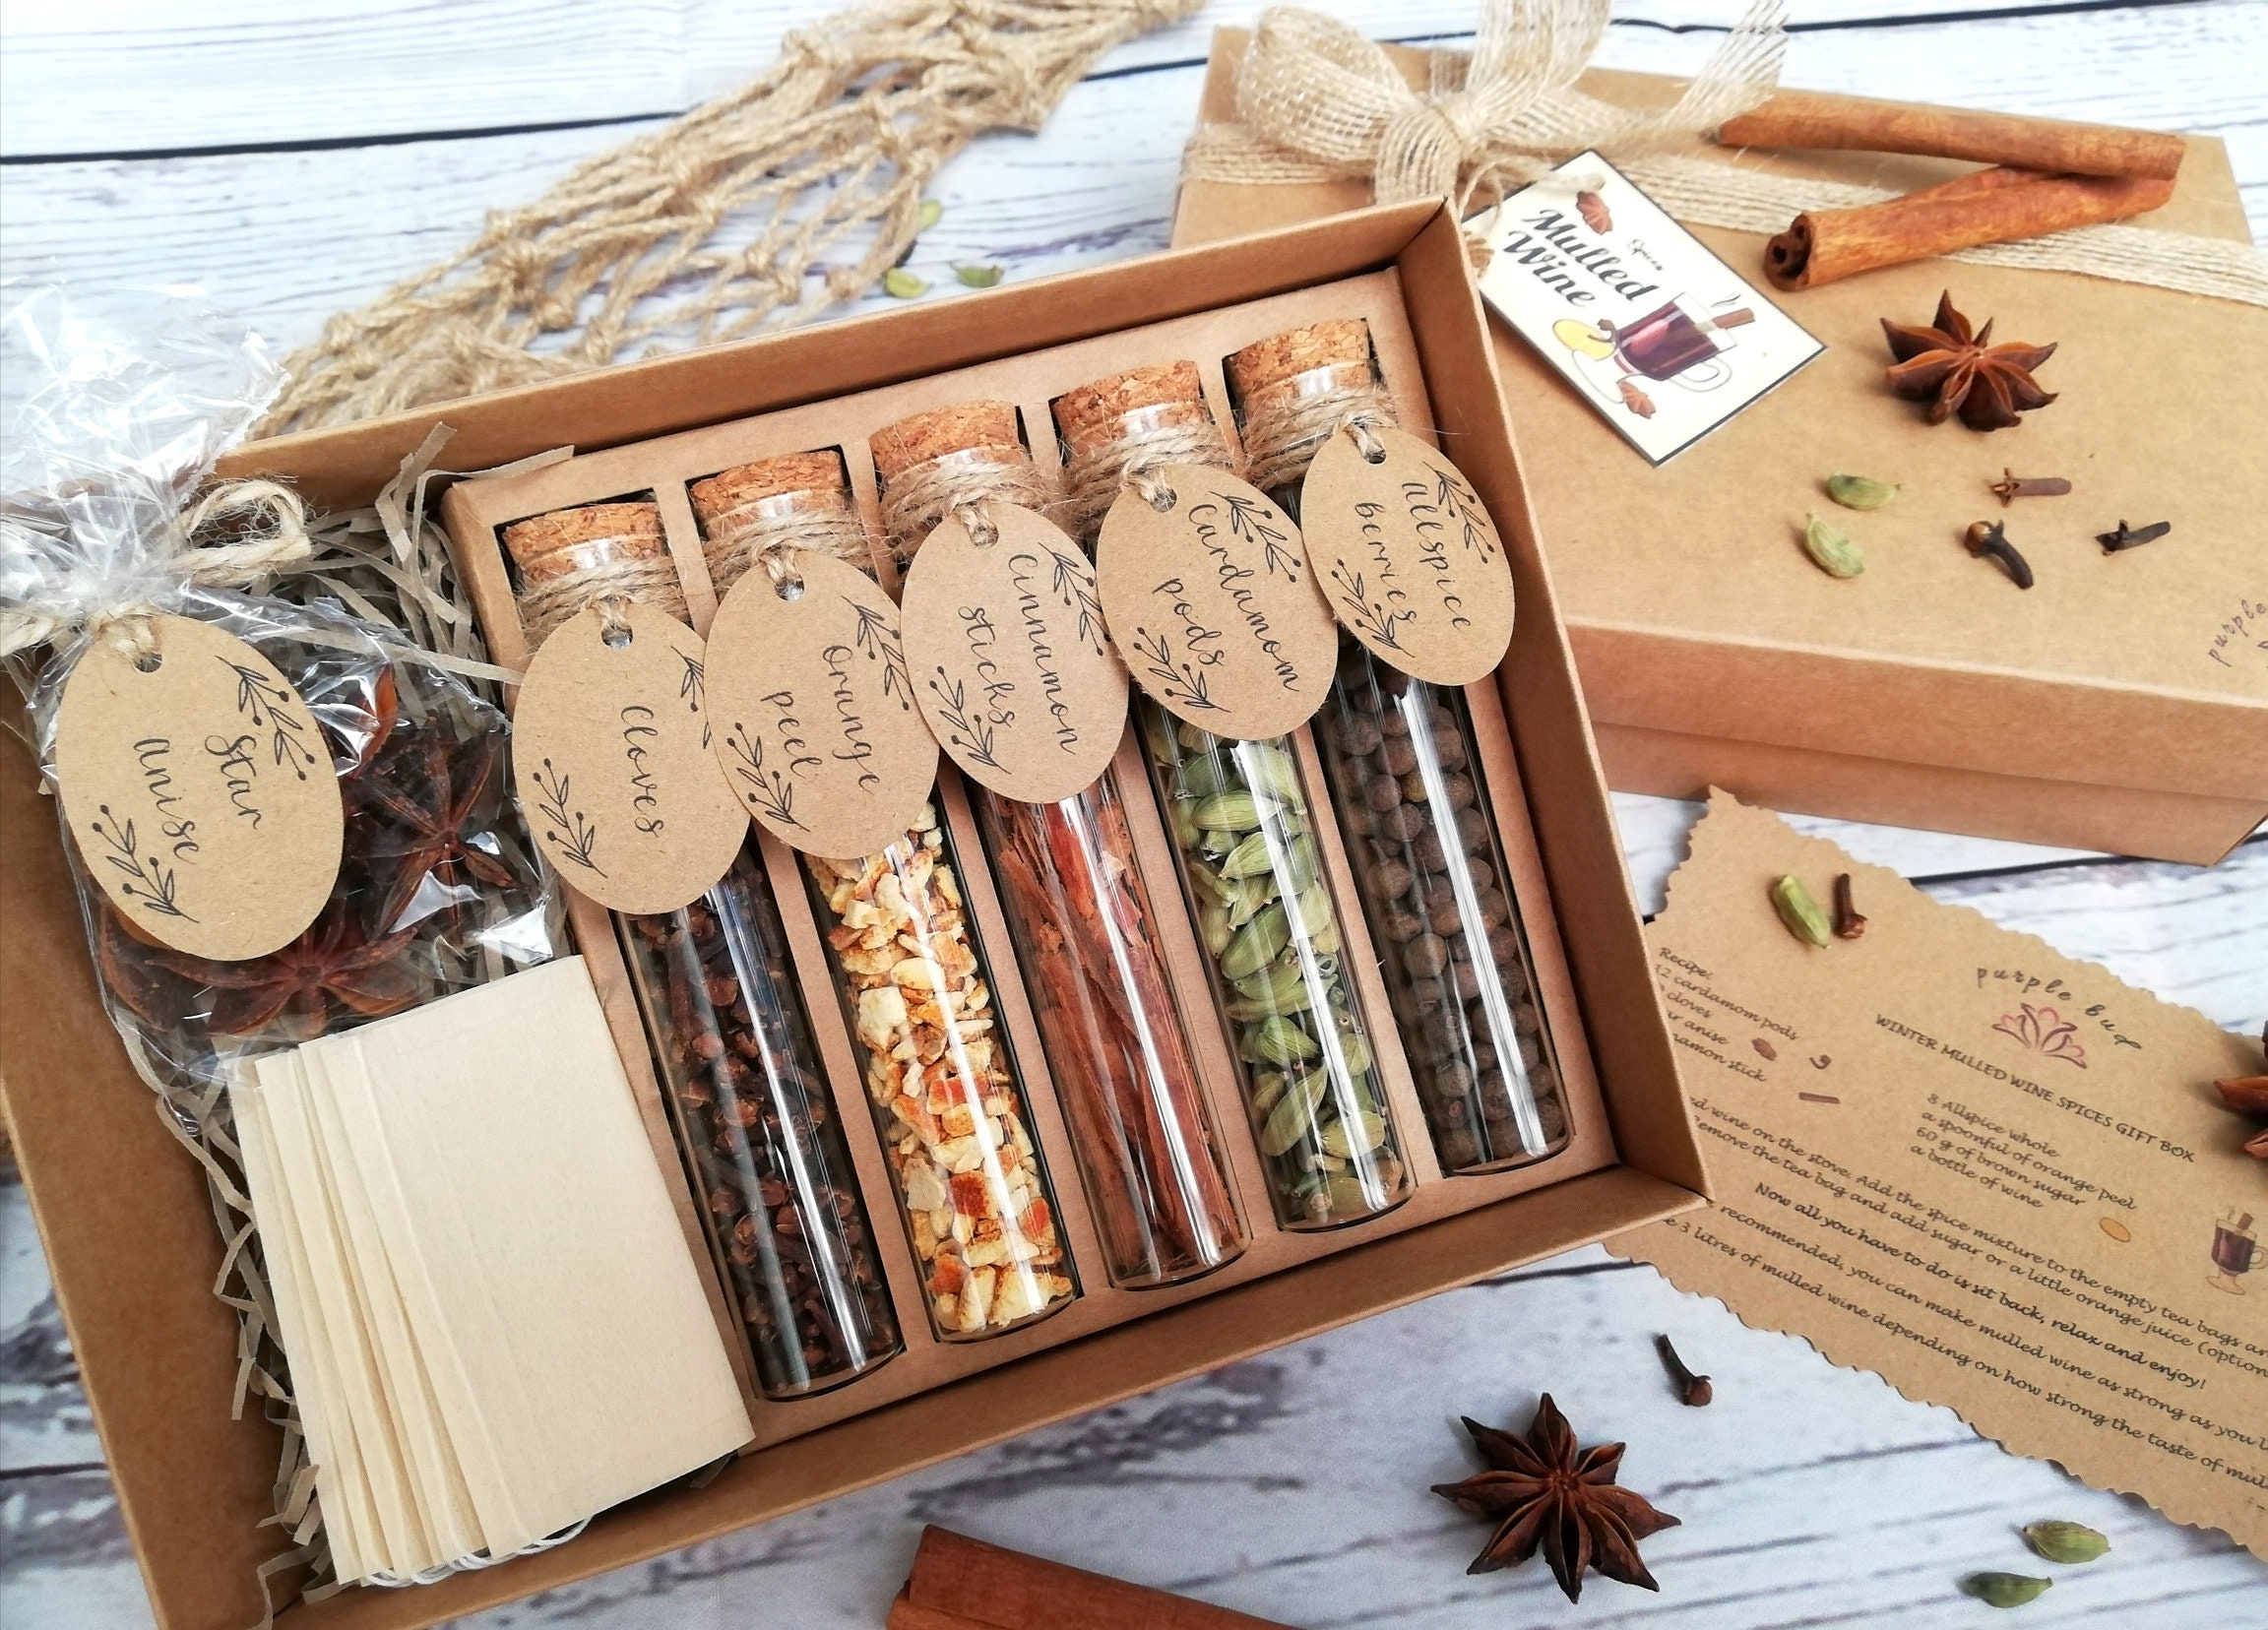 Winter Mulled Wine Spices Kit Gift Box or Sample Warm Spices Gift Set Gift  for Wine Lover, Christmas Atmosphere Secret Santa Gift 